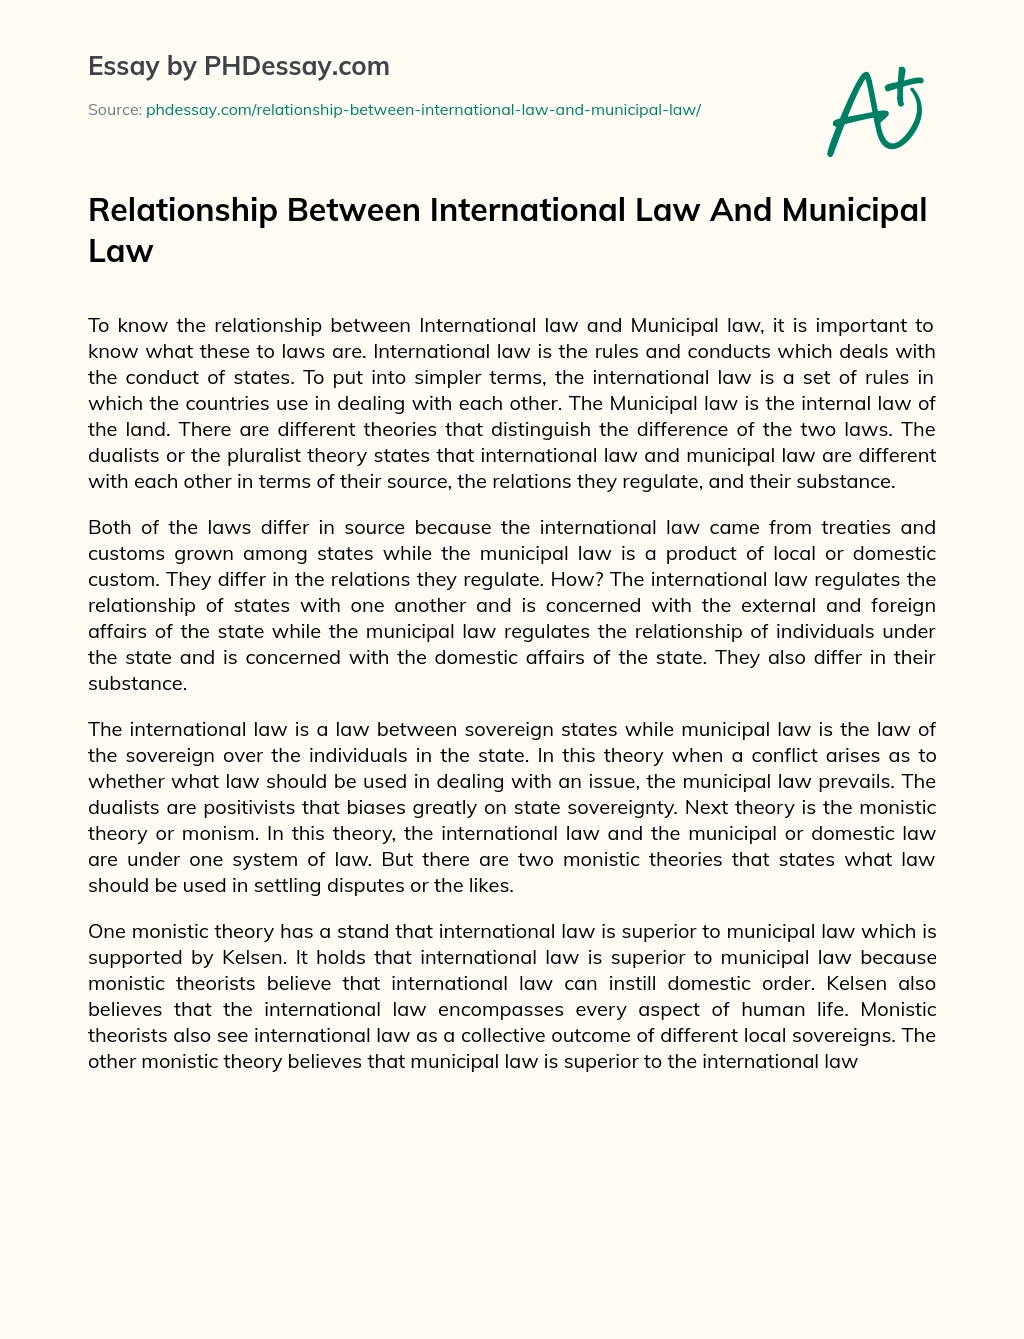 Relationship Between International Law And Municipal Law essay